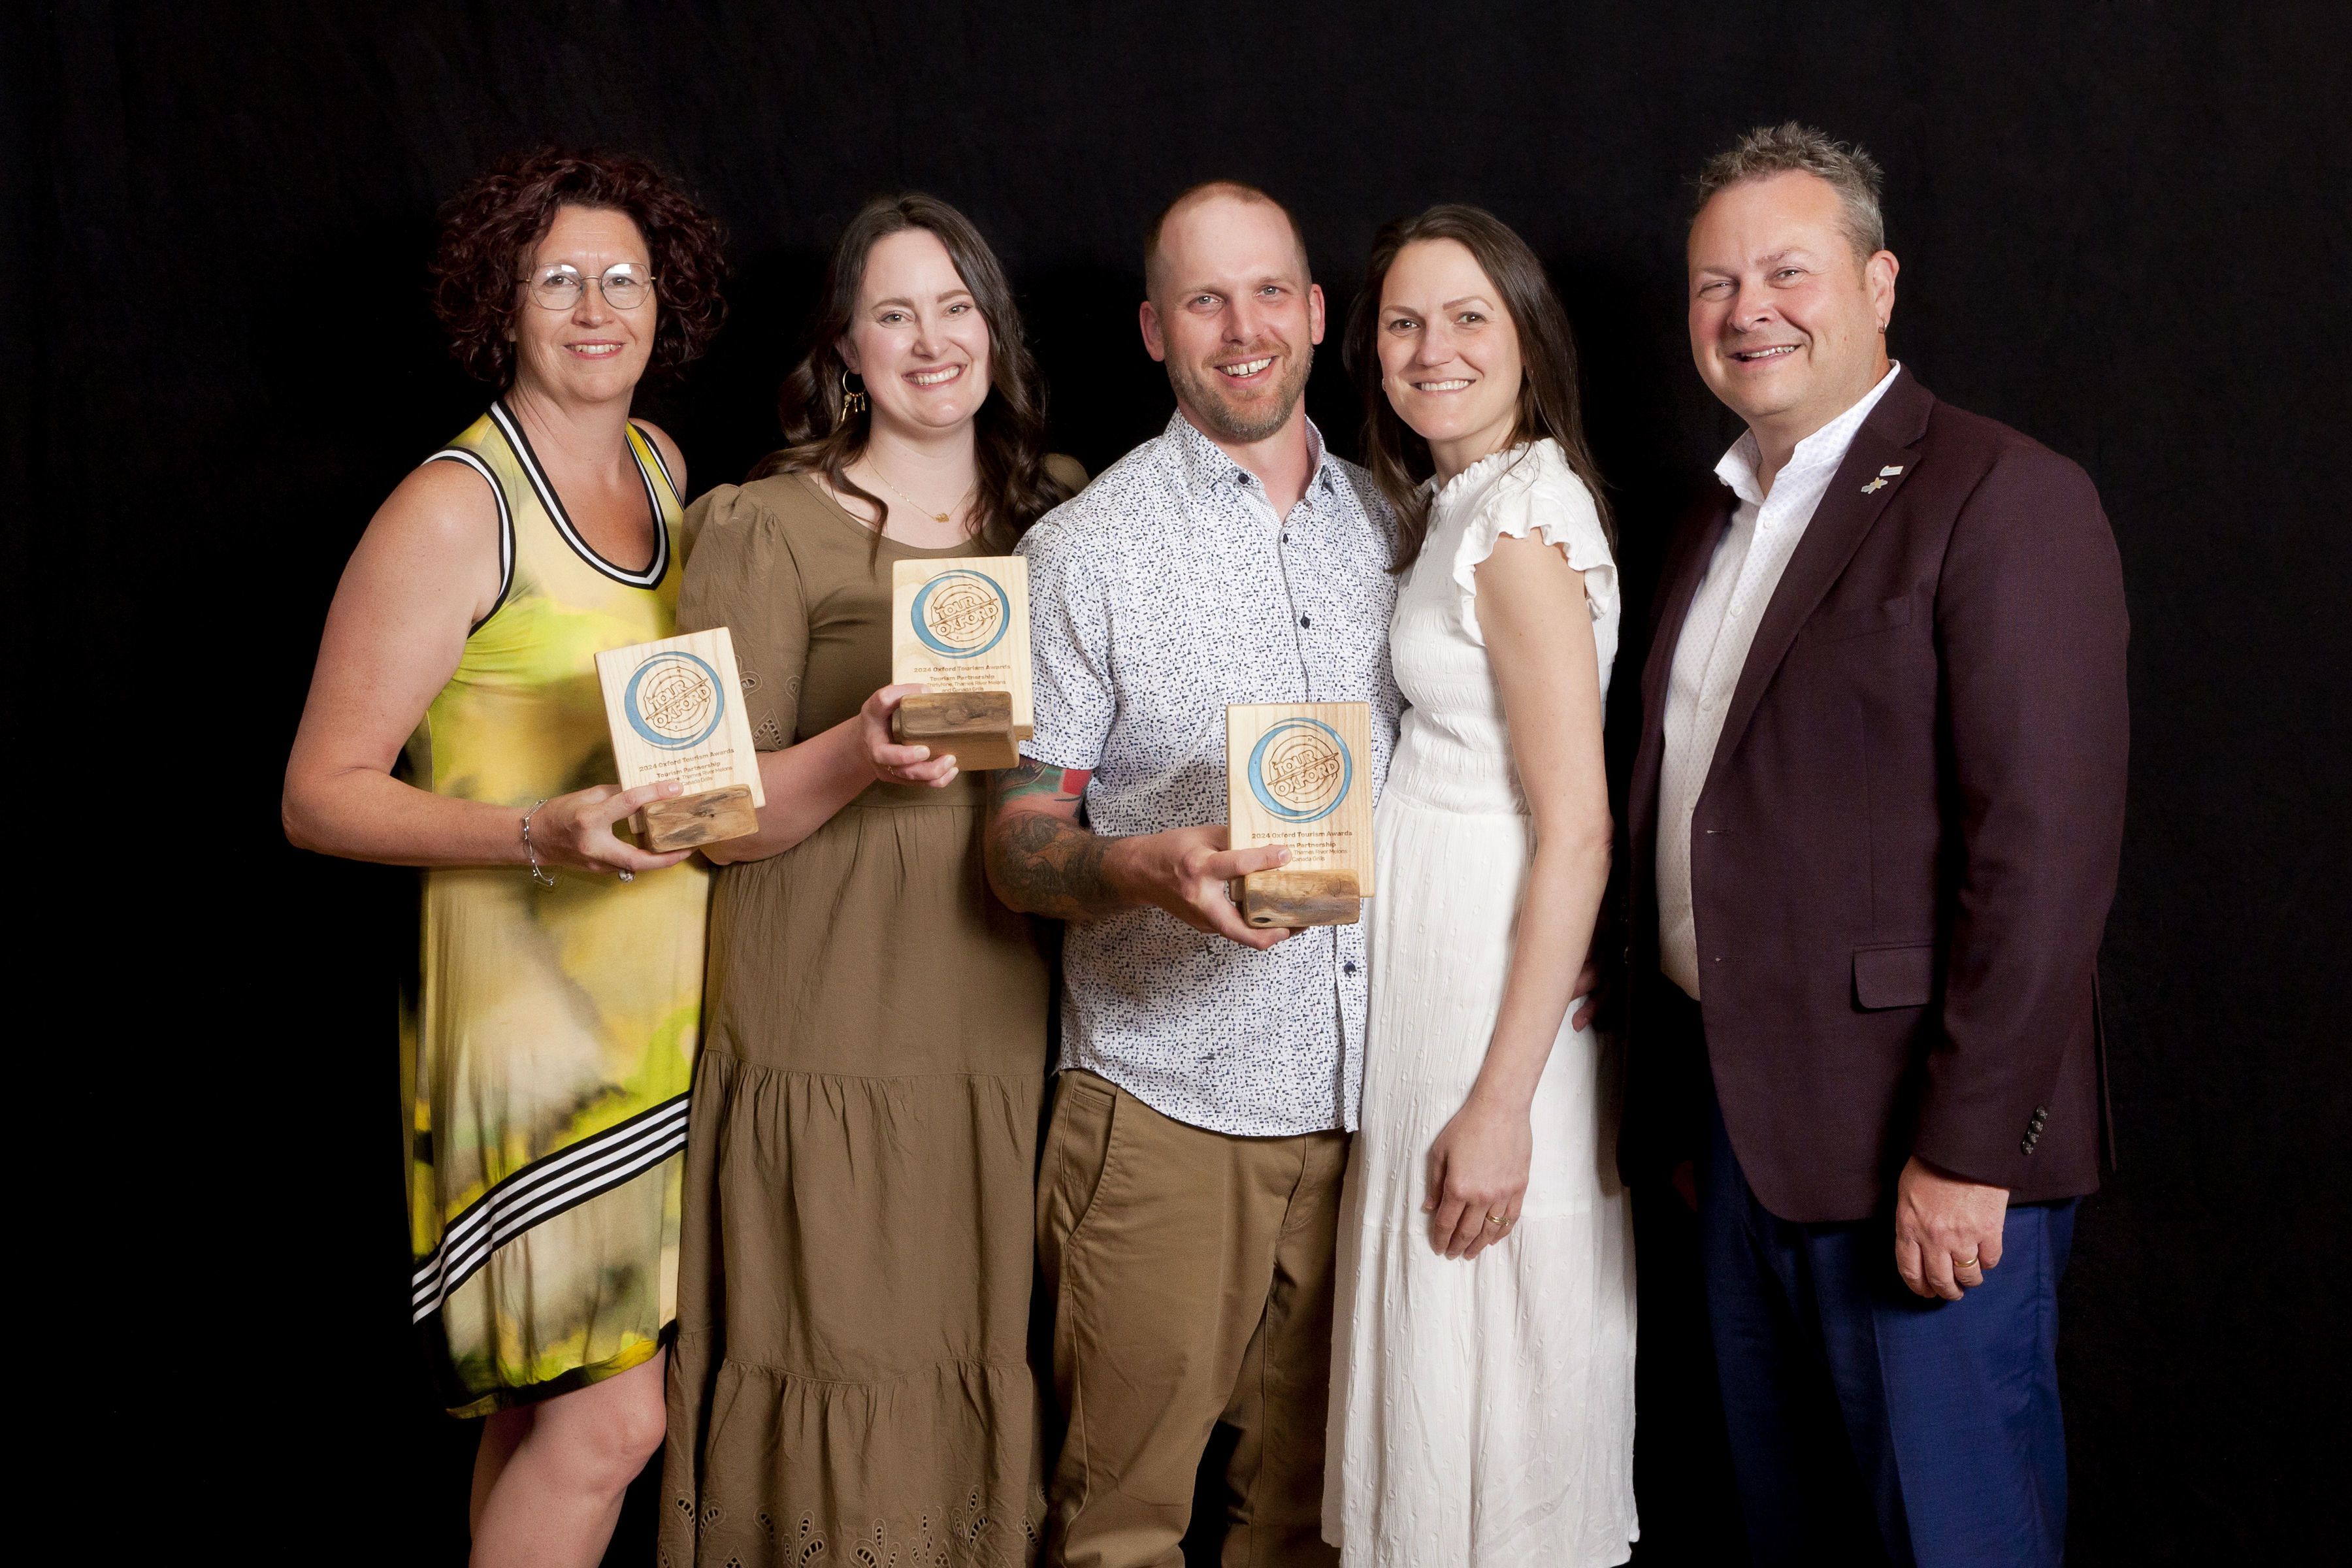 Canada Grills SixThirtyNine Thames River Melons receiving their Oxford Tourism Award